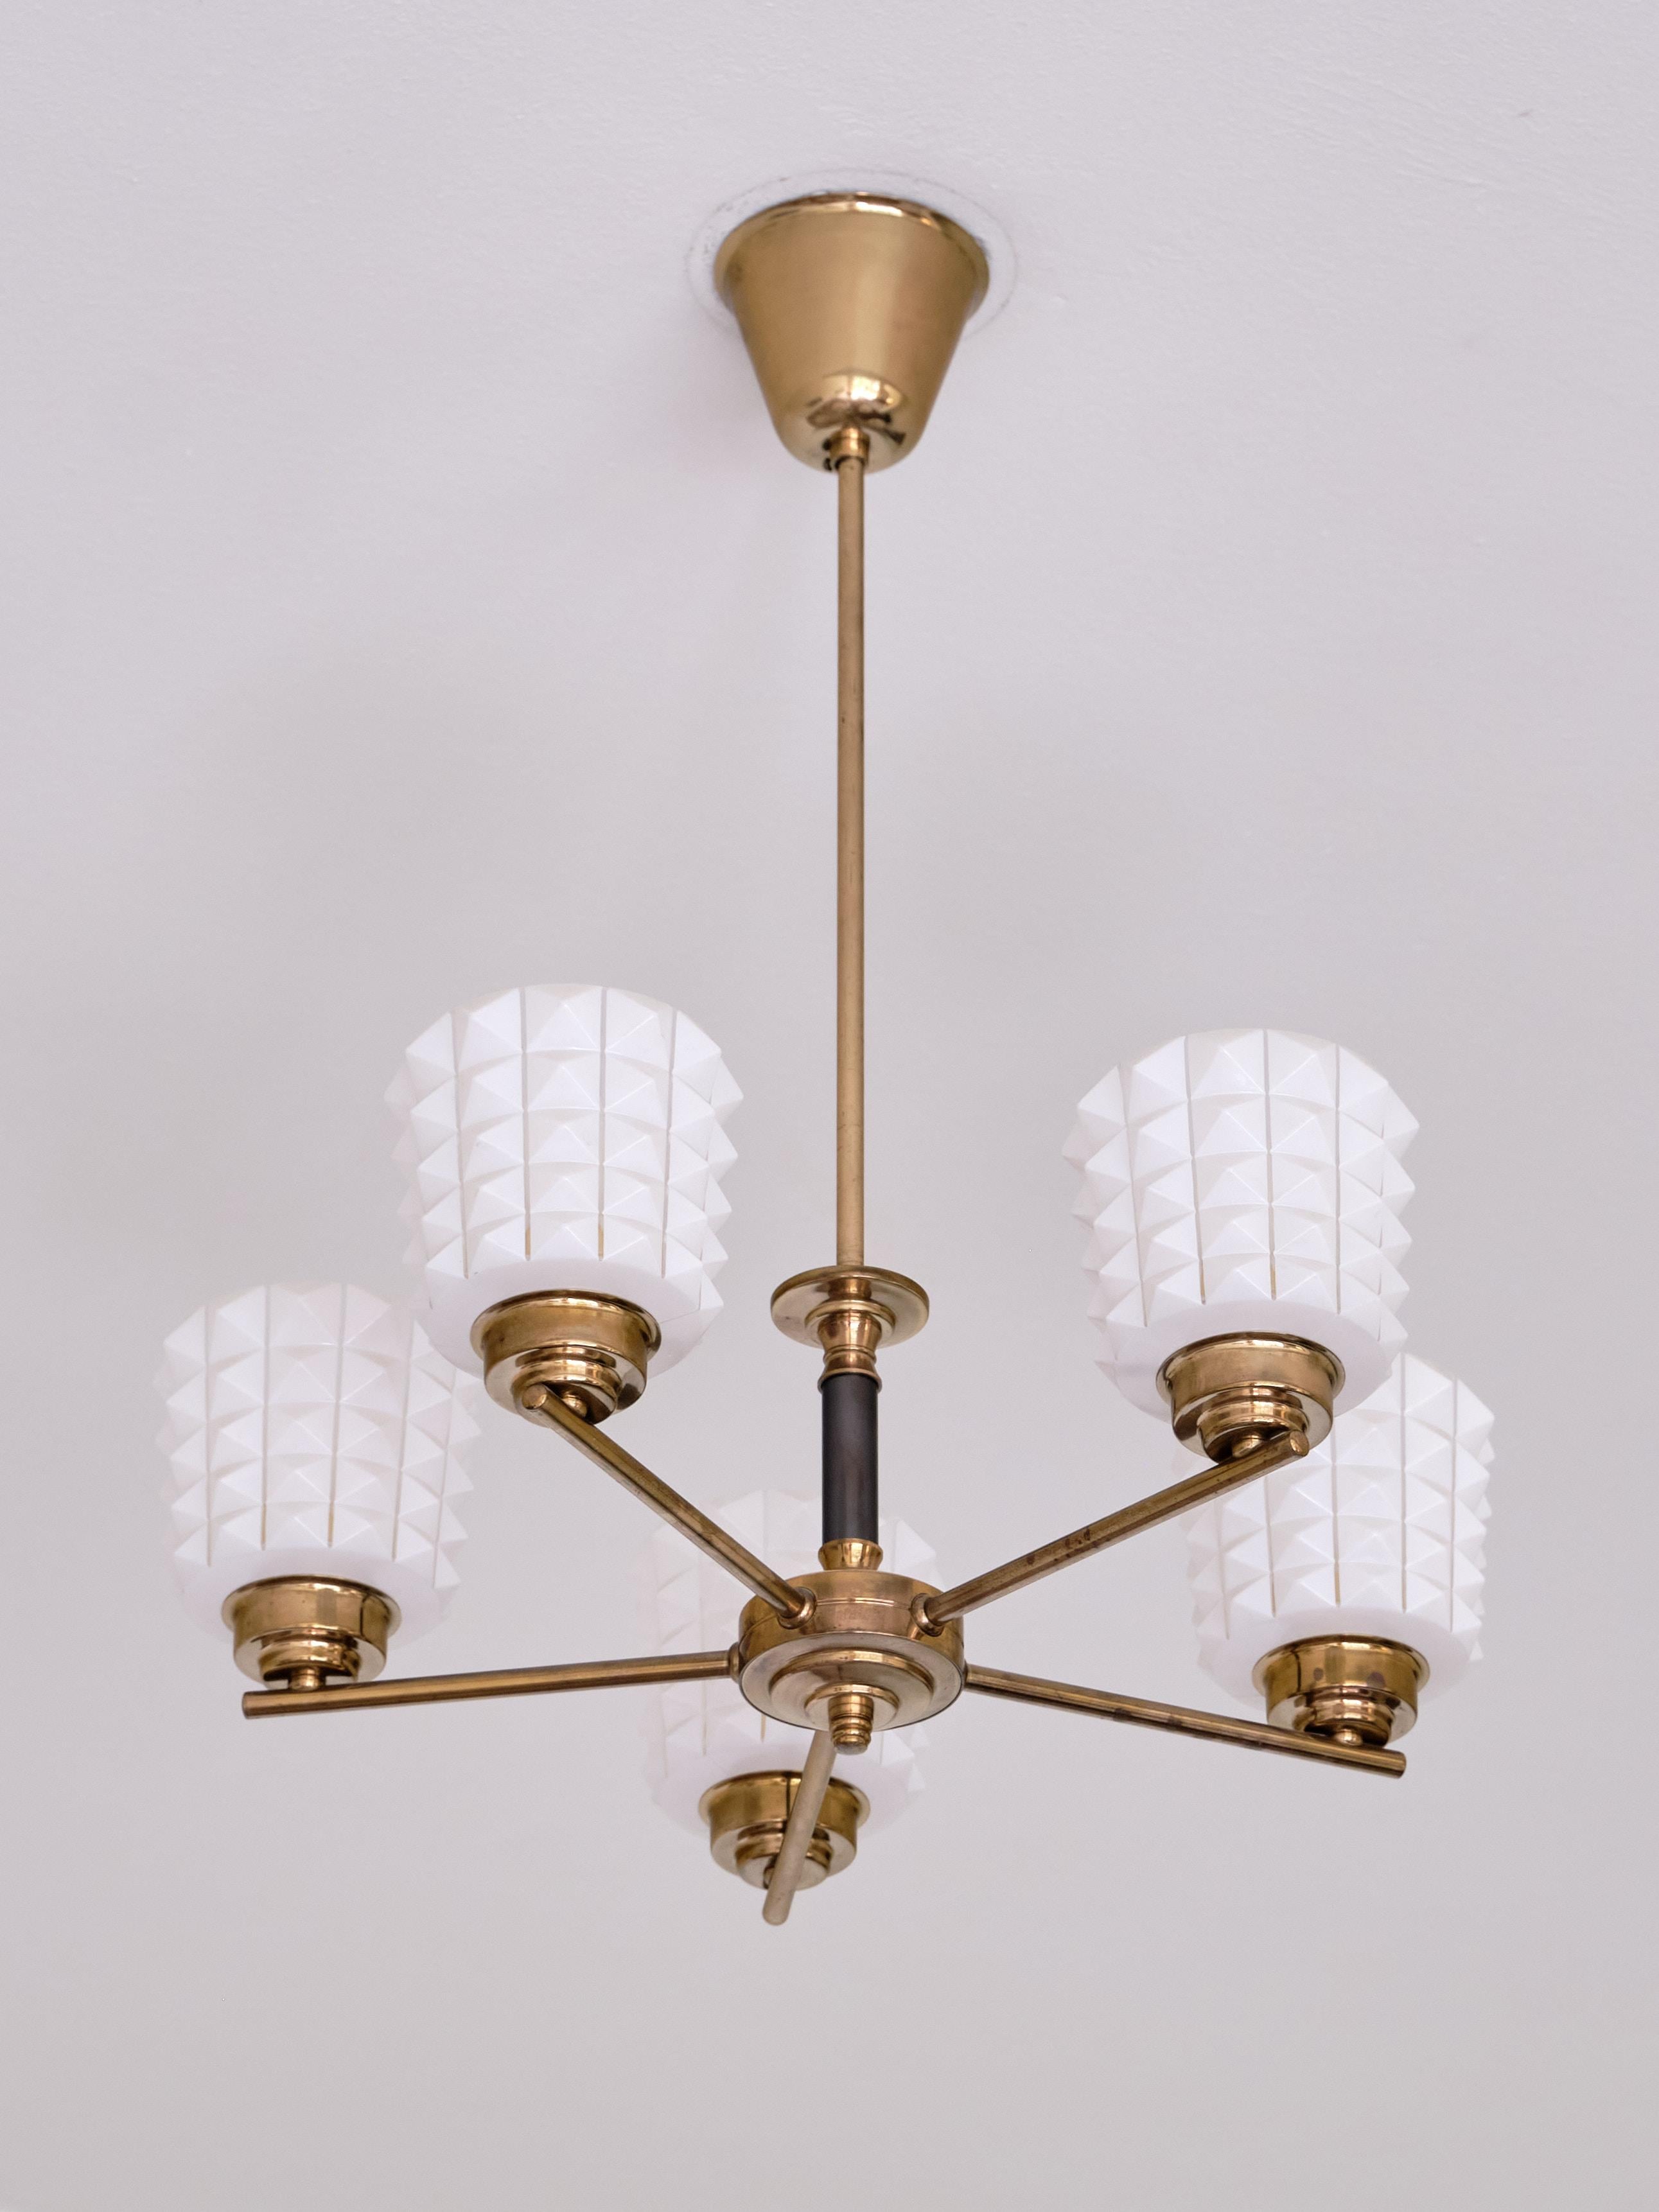 Swedish Modern Five Arm Chandelier in Brass and Studded Opal Glass, 1950s For Sale 8